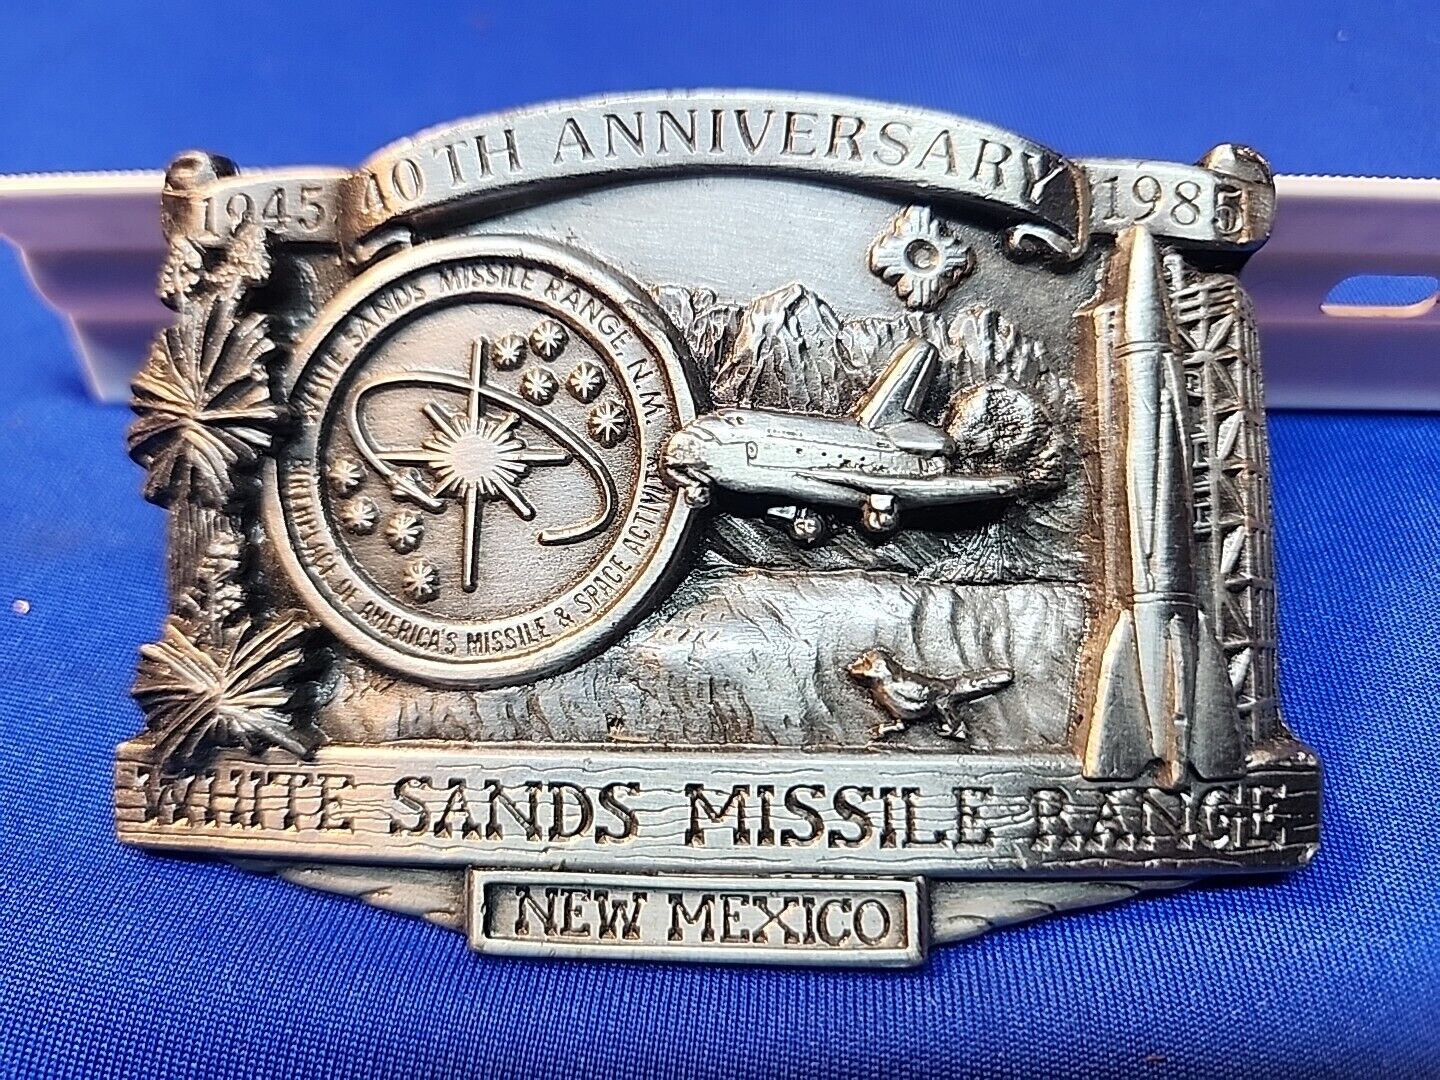 Vintage White Sands Missile Range New Mexico 40th Anniversary 1985 Belt Buckle